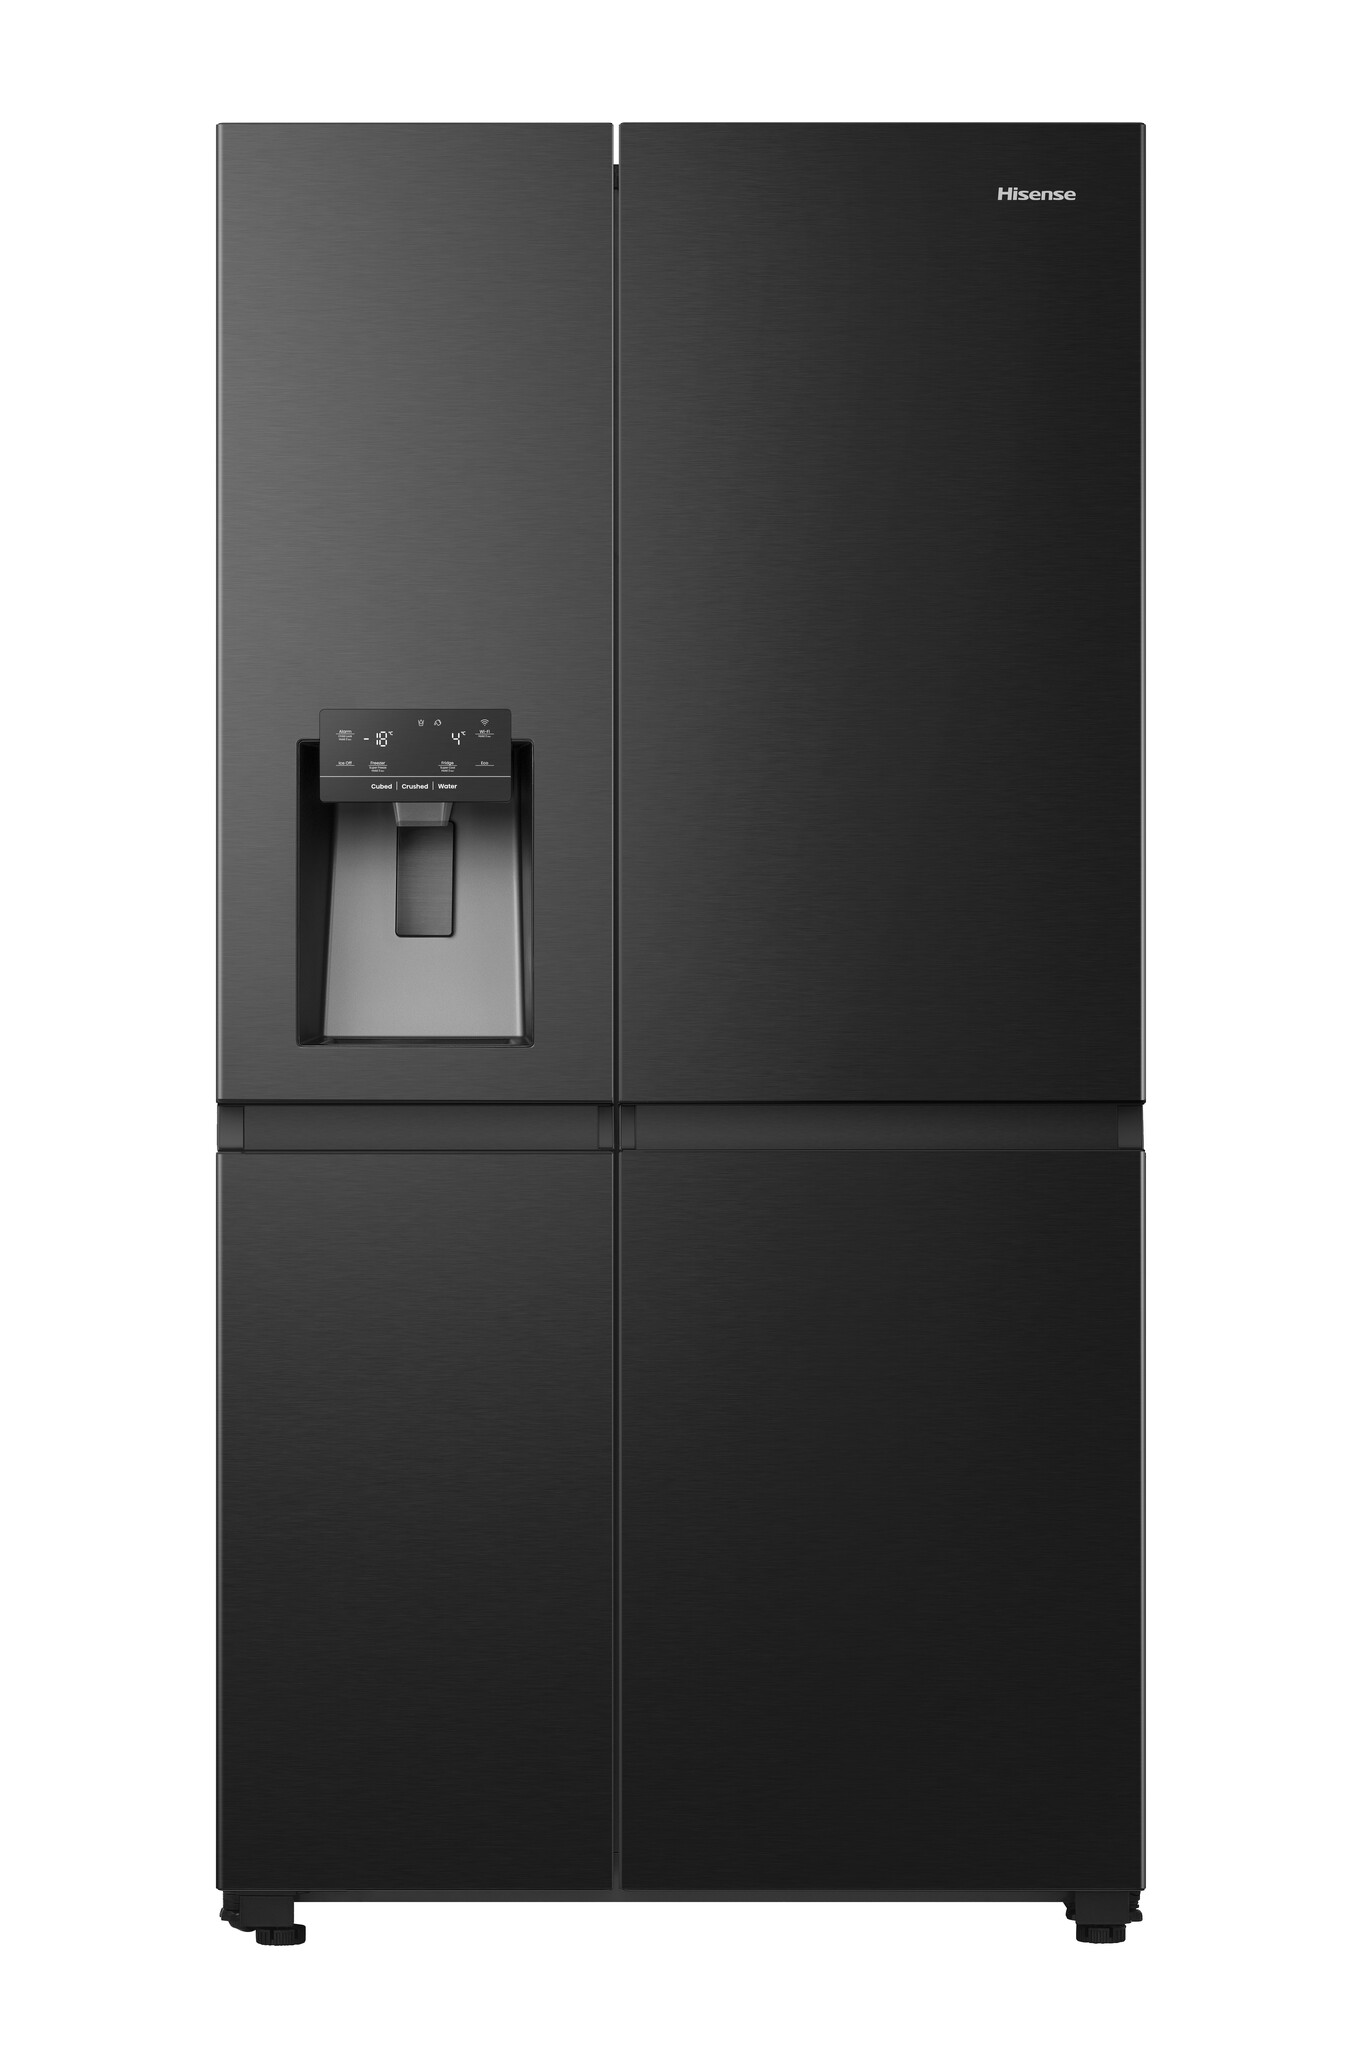 Hisense RS818N4TFE Wifi Connected Non-Plumbed Frost Free American Fridge Freezer – Black / Stainless Steel – E Rated #366716